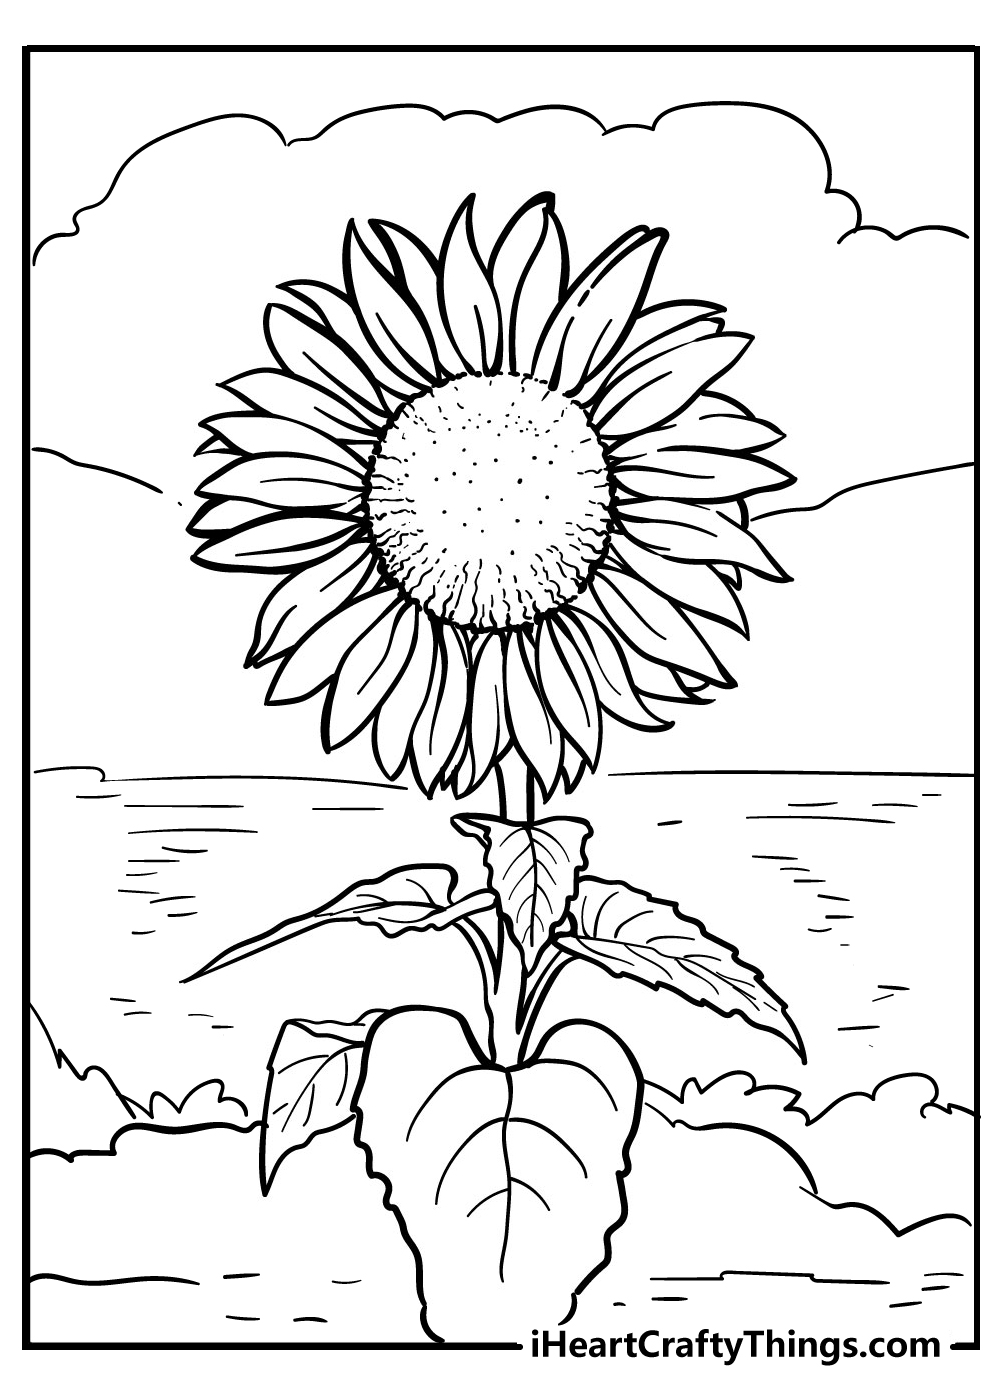 Sunflower coloring pages free printables